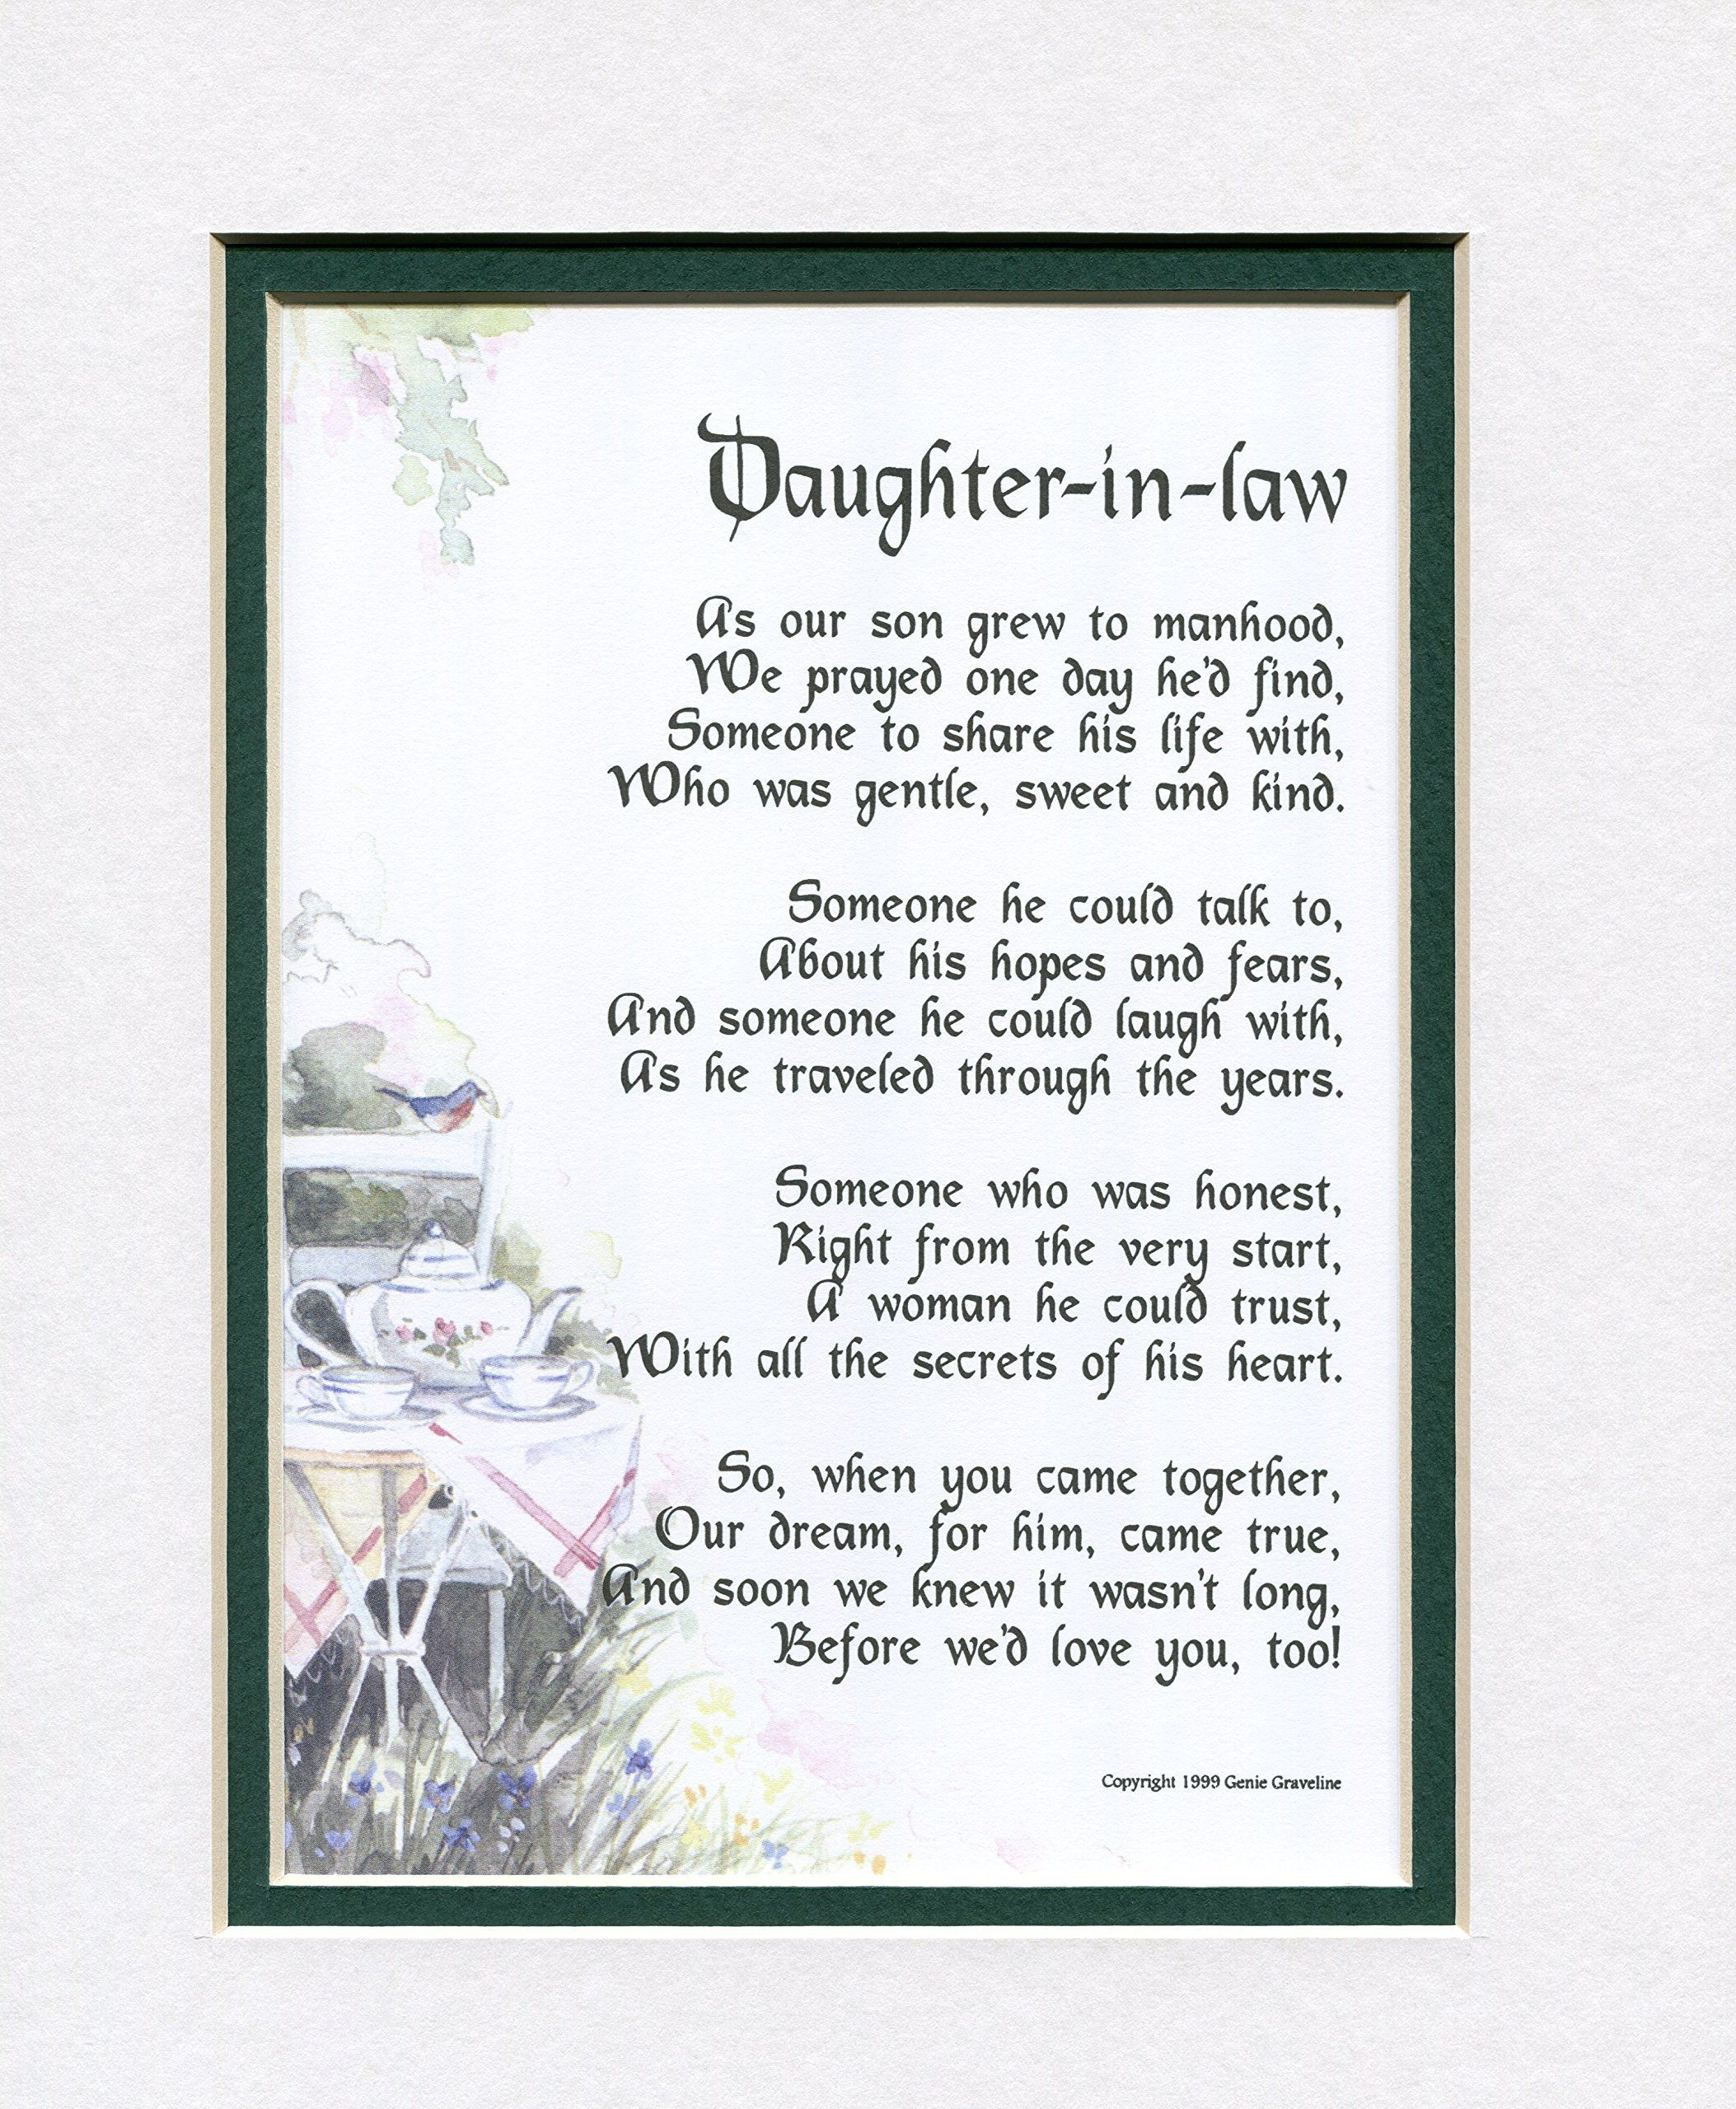 Birthday Gift Ideas For Daughter In Law
 A Gift For A Daughter in law 89 Touching 8x10 Poem